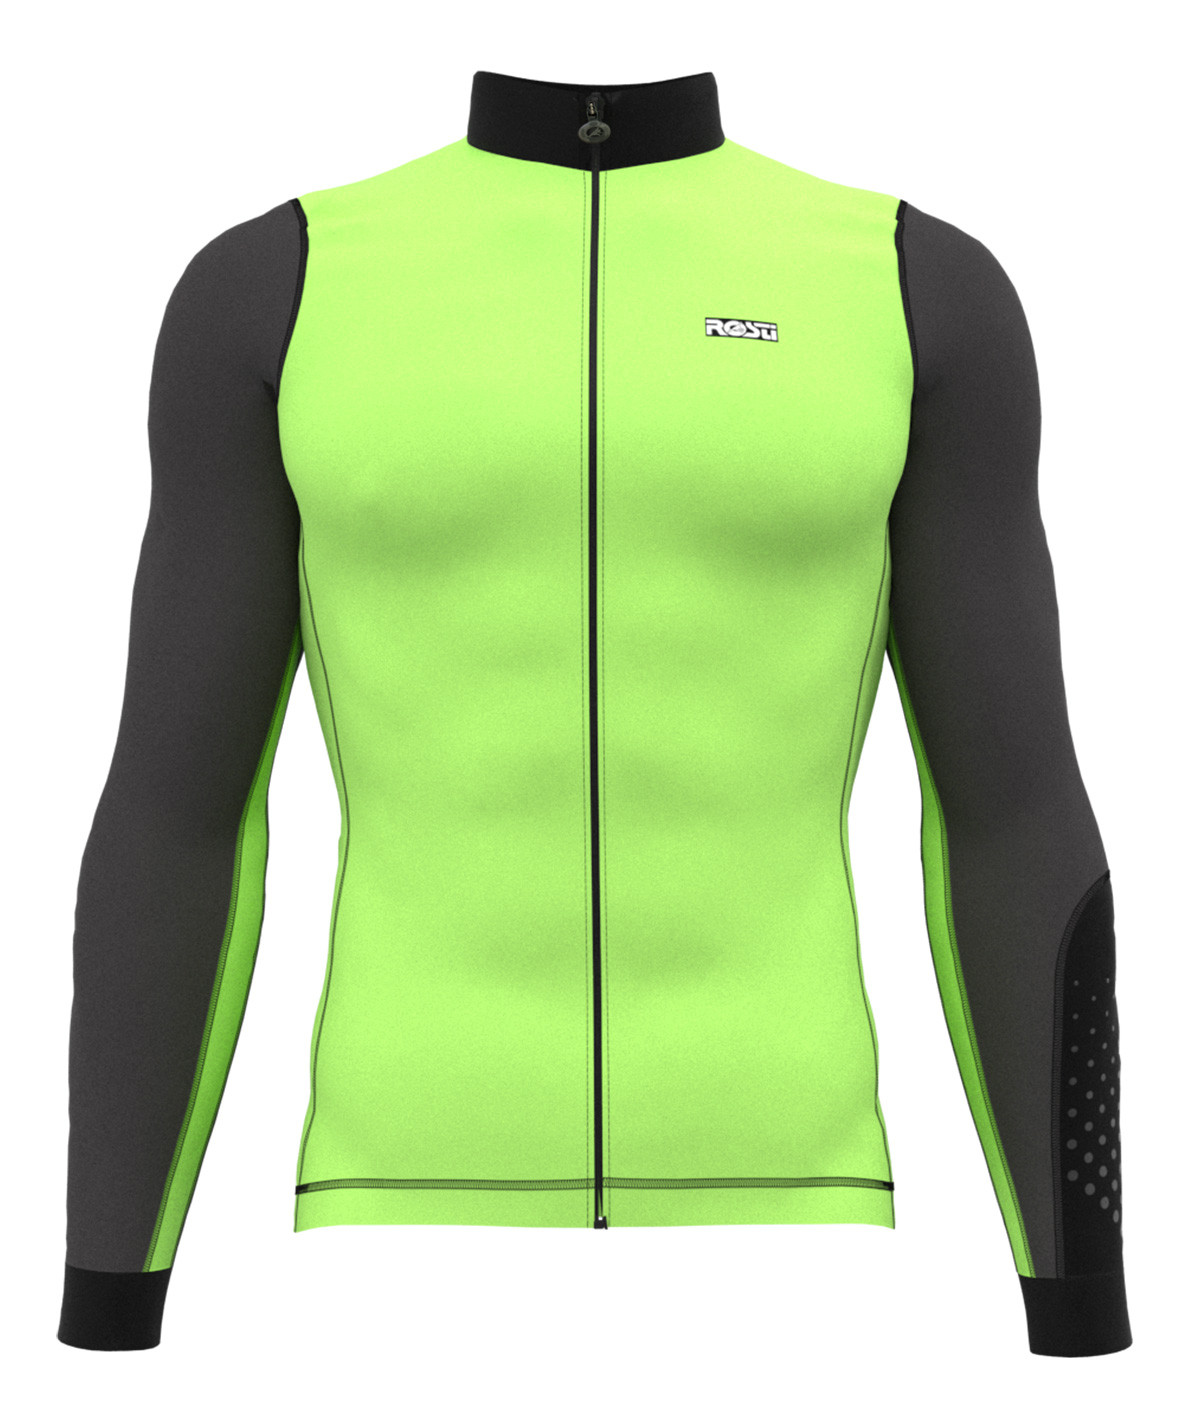 Spring long sleeved jersey